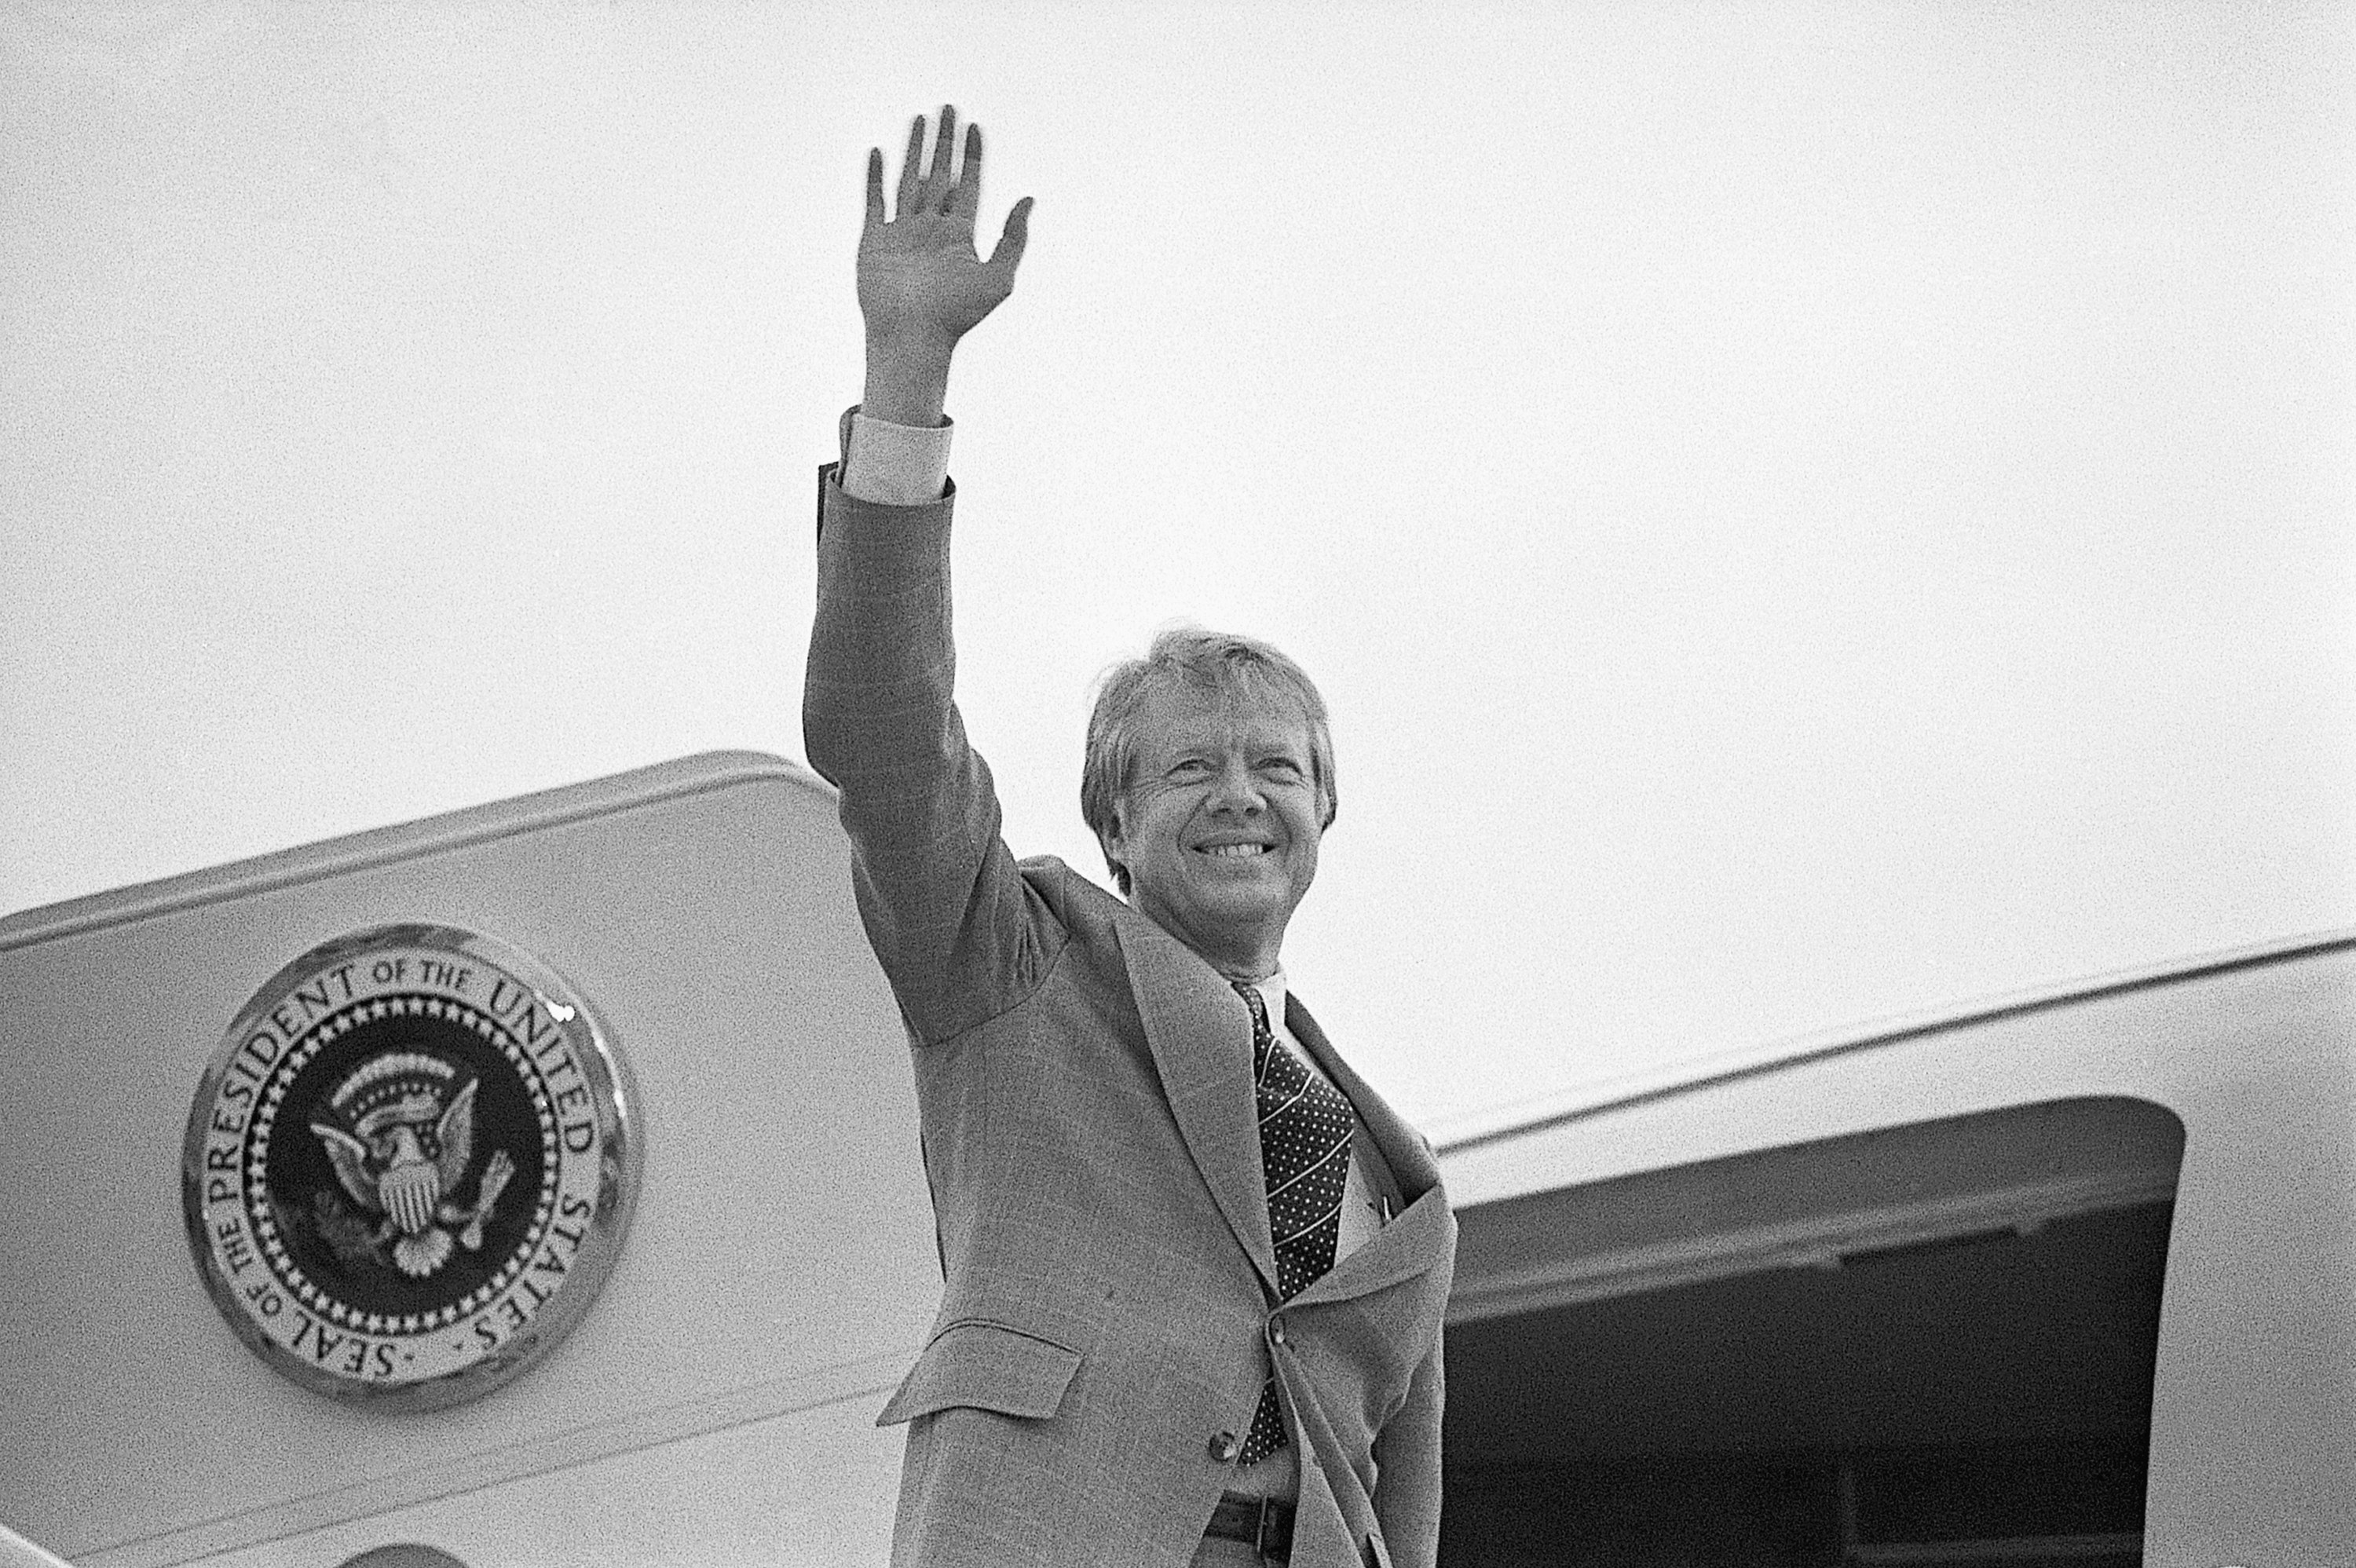 President Carter waves as he boards a helicopter on the White House lawn to fly to Camp David, Maryland